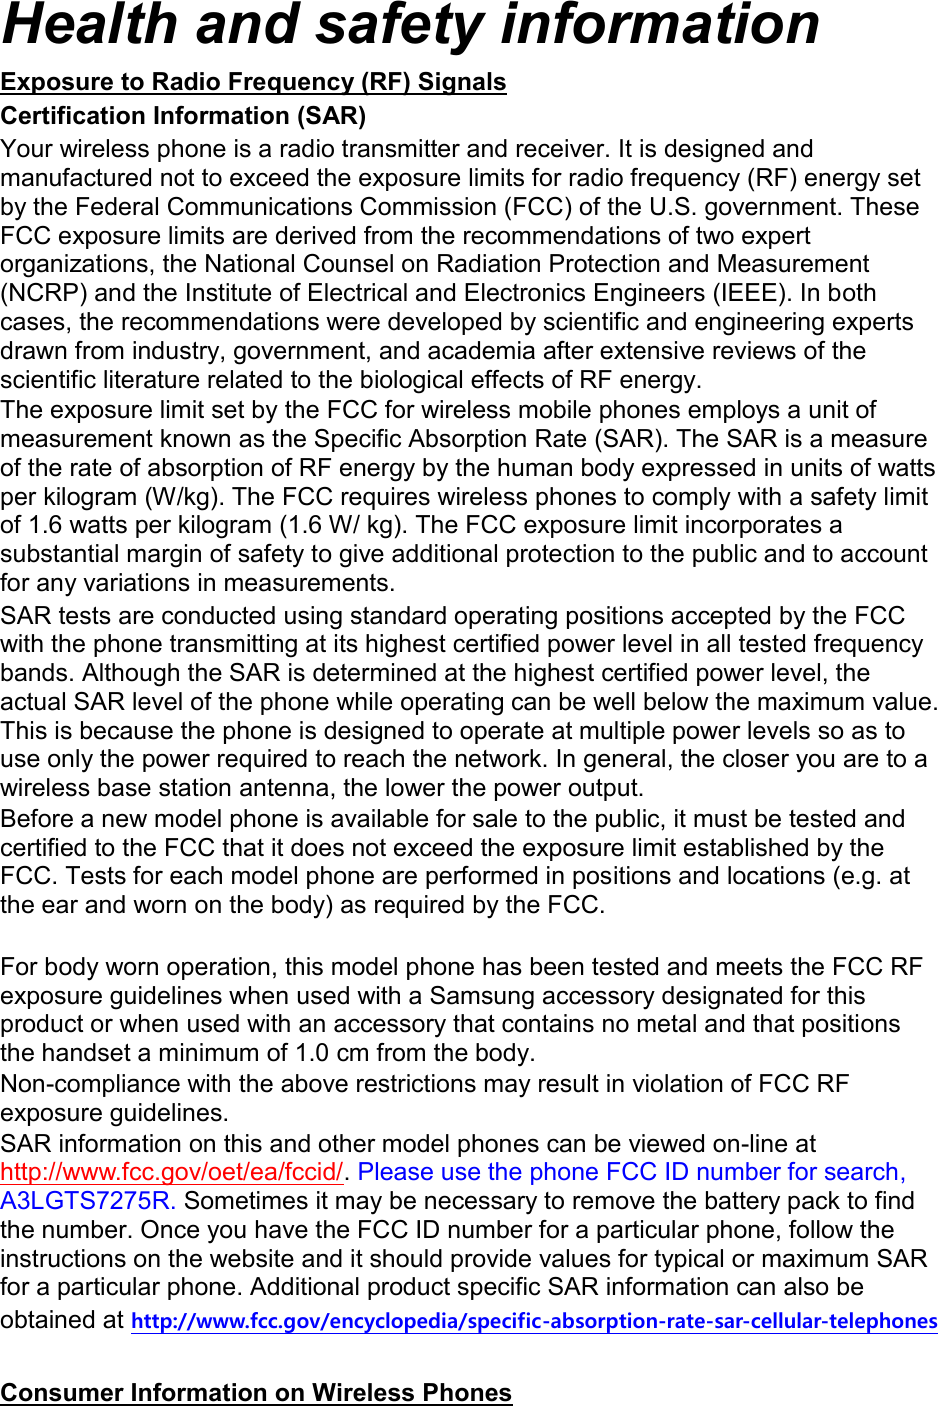 Health and safety information Exposure to Radio Frequency (RF) Signals Certification Information (SAR) Your wireless phone is a radio transmitter and receiver. It is designed and manufactured not to exceed the exposure limits for radio frequency (RF) energy set by the Federal Communications Commission (FCC) of the U.S. government. These FCC exposure limits are derived from the recommendations of two expert organizations, the National Counsel on Radiation Protection and Measurement (NCRP) and the Institute of Electrical and Electronics Engineers (IEEE). In both cases, the recommendations were developed by scientific and engineering experts drawn from industry, government, and academia after extensive reviews of the scientific literature related to the biological effects of RF energy. The exposure limit set by the FCC for wireless mobile phones employs a unit of measurement known as the Specific Absorption Rate (SAR). The SAR is a measure of the rate of absorption of RF energy by the human body expressed in units of watts per kilogram (W/kg). The FCC requires wireless phones to comply with a safety limit of 1.6 watts per kilogram (1.6 W/ kg). The FCC exposure limit incorporates a substantial margin of safety to give additional protection to the public and to account for any variations in measurements. SAR tests are conducted using standard operating positions accepted by the FCC with the phone transmitting at its highest certified power level in all tested frequency bands. Although the SAR is determined at the highest certified power level, the actual SAR level of the phone while operating can be well below the maximum value. This is because the phone is designed to operate at multiple power levels so as to use only the power required to reach the network. In general, the closer you are to a wireless base station antenna, the lower the power output. Before a new model phone is available for sale to the public, it must be tested and certified to the FCC that it does not exceed the exposure limit established by the FCC. Tests for each model phone are performed in positions and locations (e.g. at the ear and worn on the body) as required by the FCC.      For body worn operation, this model phone has been tested and meets the FCC RF exposure guidelines when used with a Samsung accessory designated for this product or when used with an accessory that contains no metal and that positions the handset a minimum of 1.0 cm from the body.   Non-compliance with the above restrictions may result in violation of FCC RF exposure guidelines. SAR information on this and other model phones can be viewed on-line at http://www.fcc.gov/oet/ea/fccid/. Please use the phone FCC ID number for search, A3LGTS7275R. Sometimes it may be necessary to remove the battery pack to find the number. Once you have the FCC ID number for a particular phone, follow the instructions on the website and it should provide values for typical or maximum SAR for a particular phone. Additional product specific SAR information can also be obtained at http://www.fcc.gov/encyclopedia/specific-absorption-rate-sar-cellular-telephones  Consumer Information on Wireless Phones 